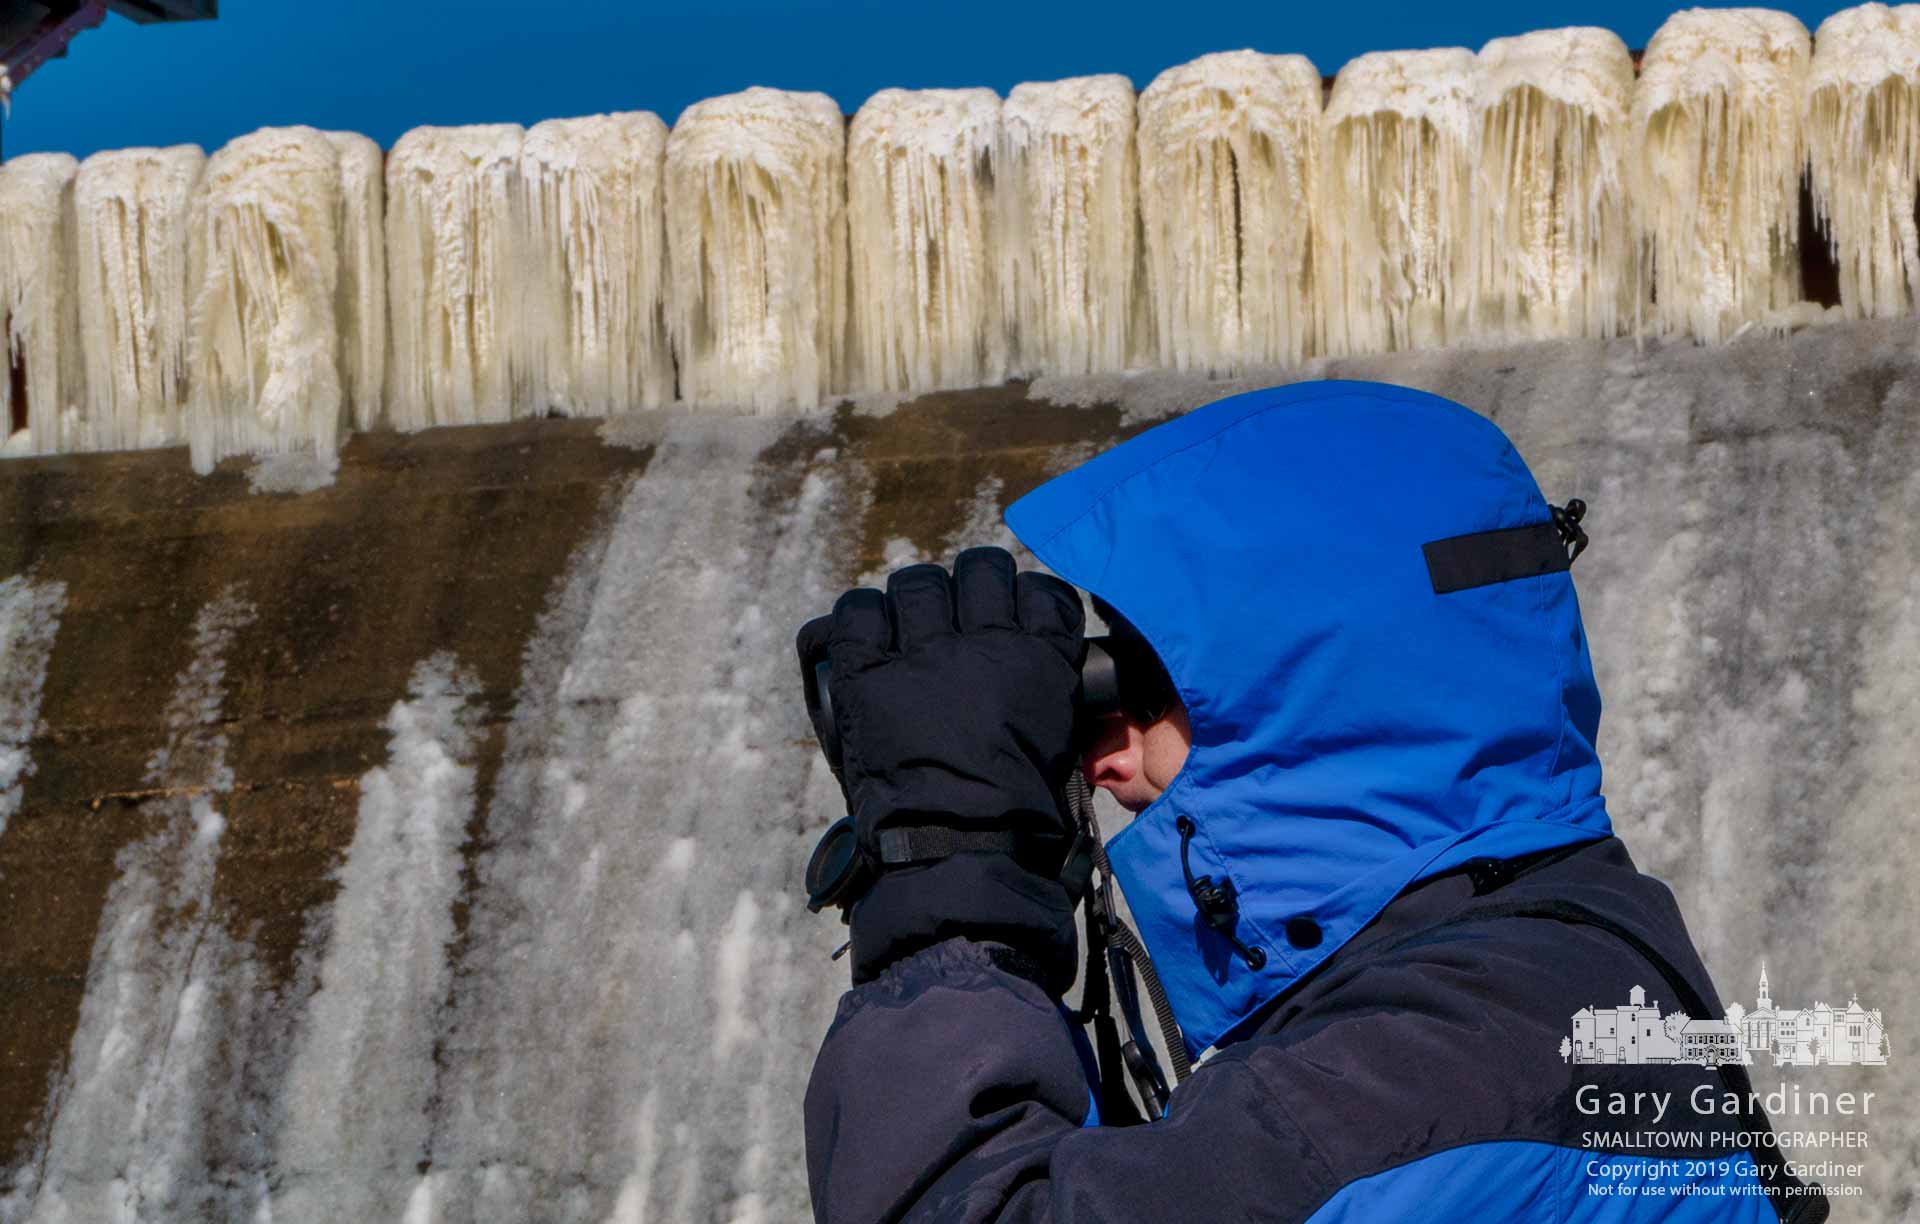 A birdwatcher looks downstream below Hoover Dam where the spillway edges are covered in sheets of ice from the below freezing nights. My Final Photo for Jan. 31, 2019.